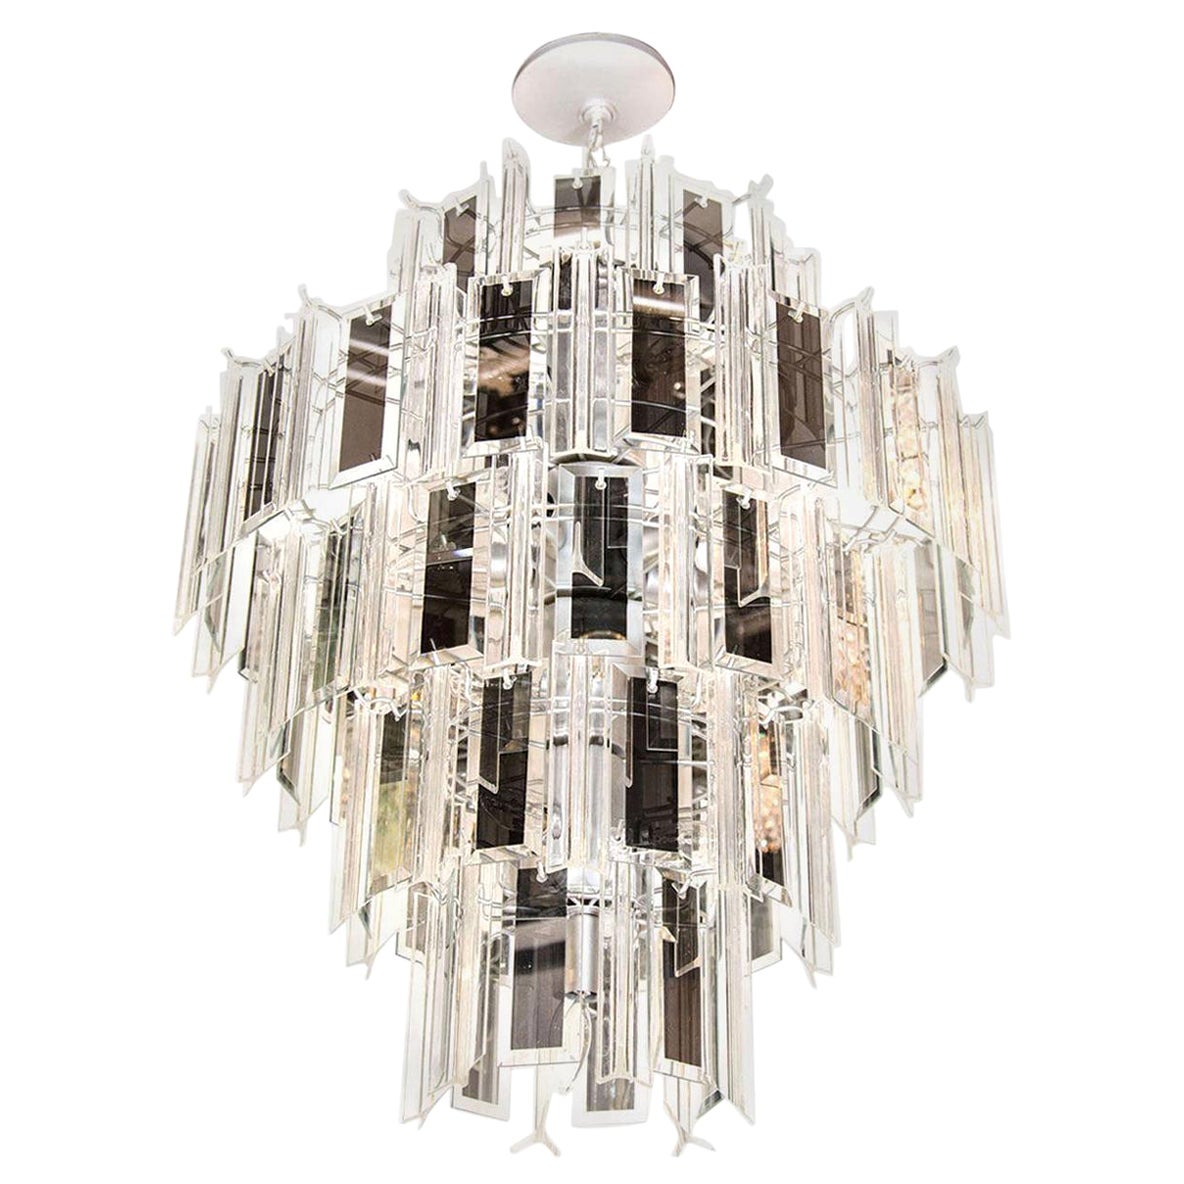 Mid-Century Modern Lucite and Mirrored Prism Chandelier, Italy, circa 1970s For Sale